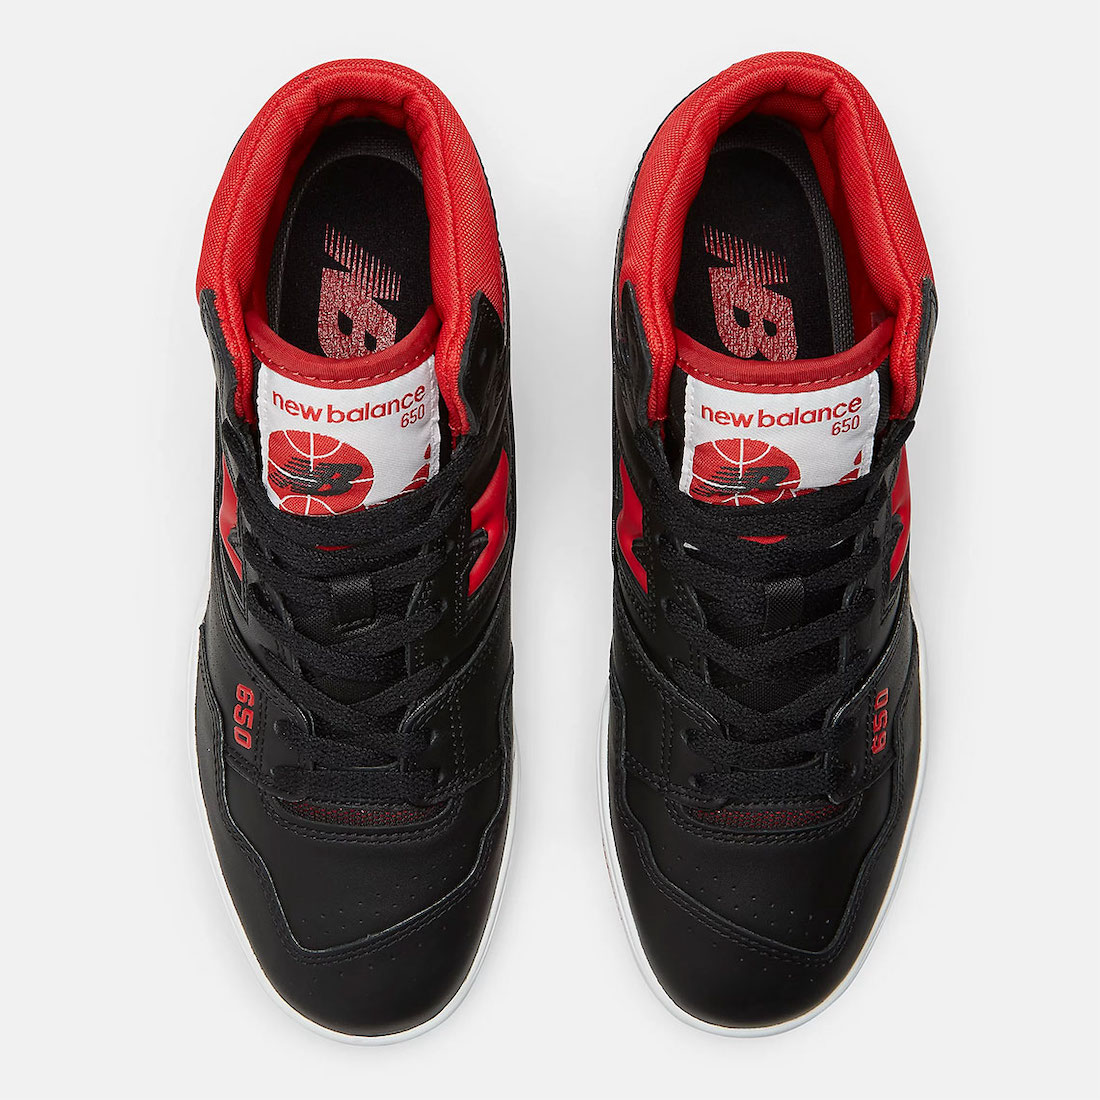 New Balance 650 Bred Black Red White BB650RBR Release Date Info